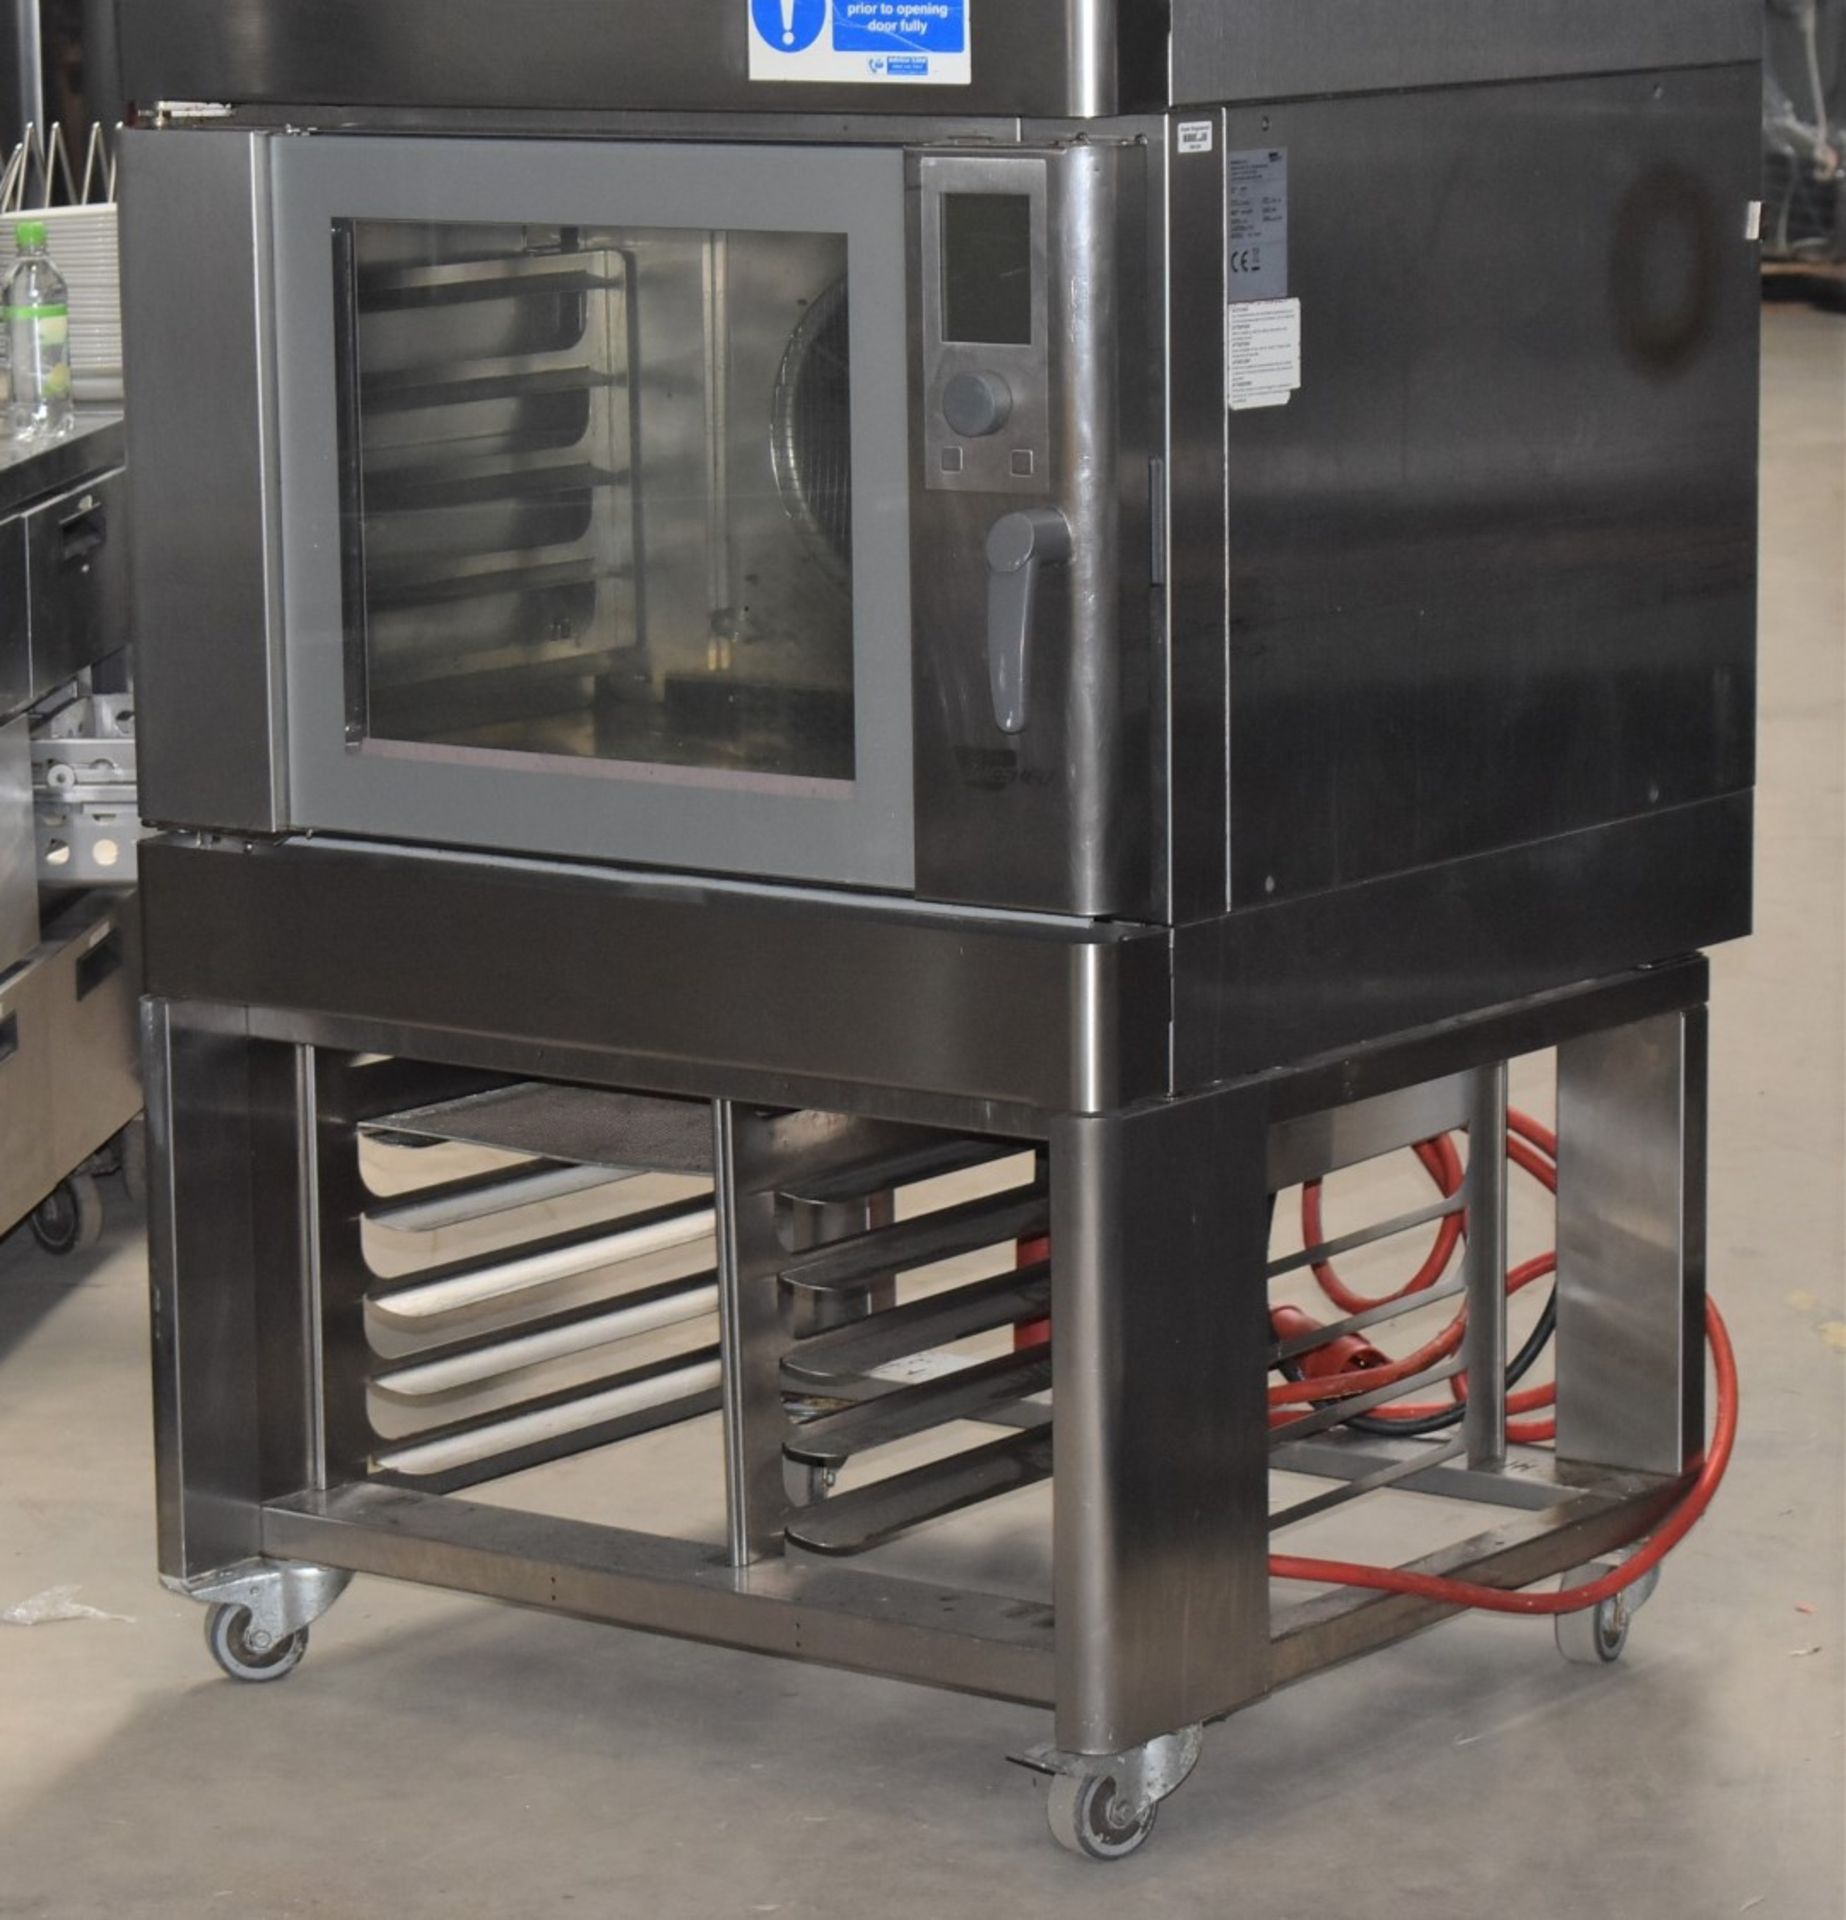 1 x Wiesheu B4-E2 Duo Commercial Convection Oven With Stainless Steel Exterior - Image 3 of 12